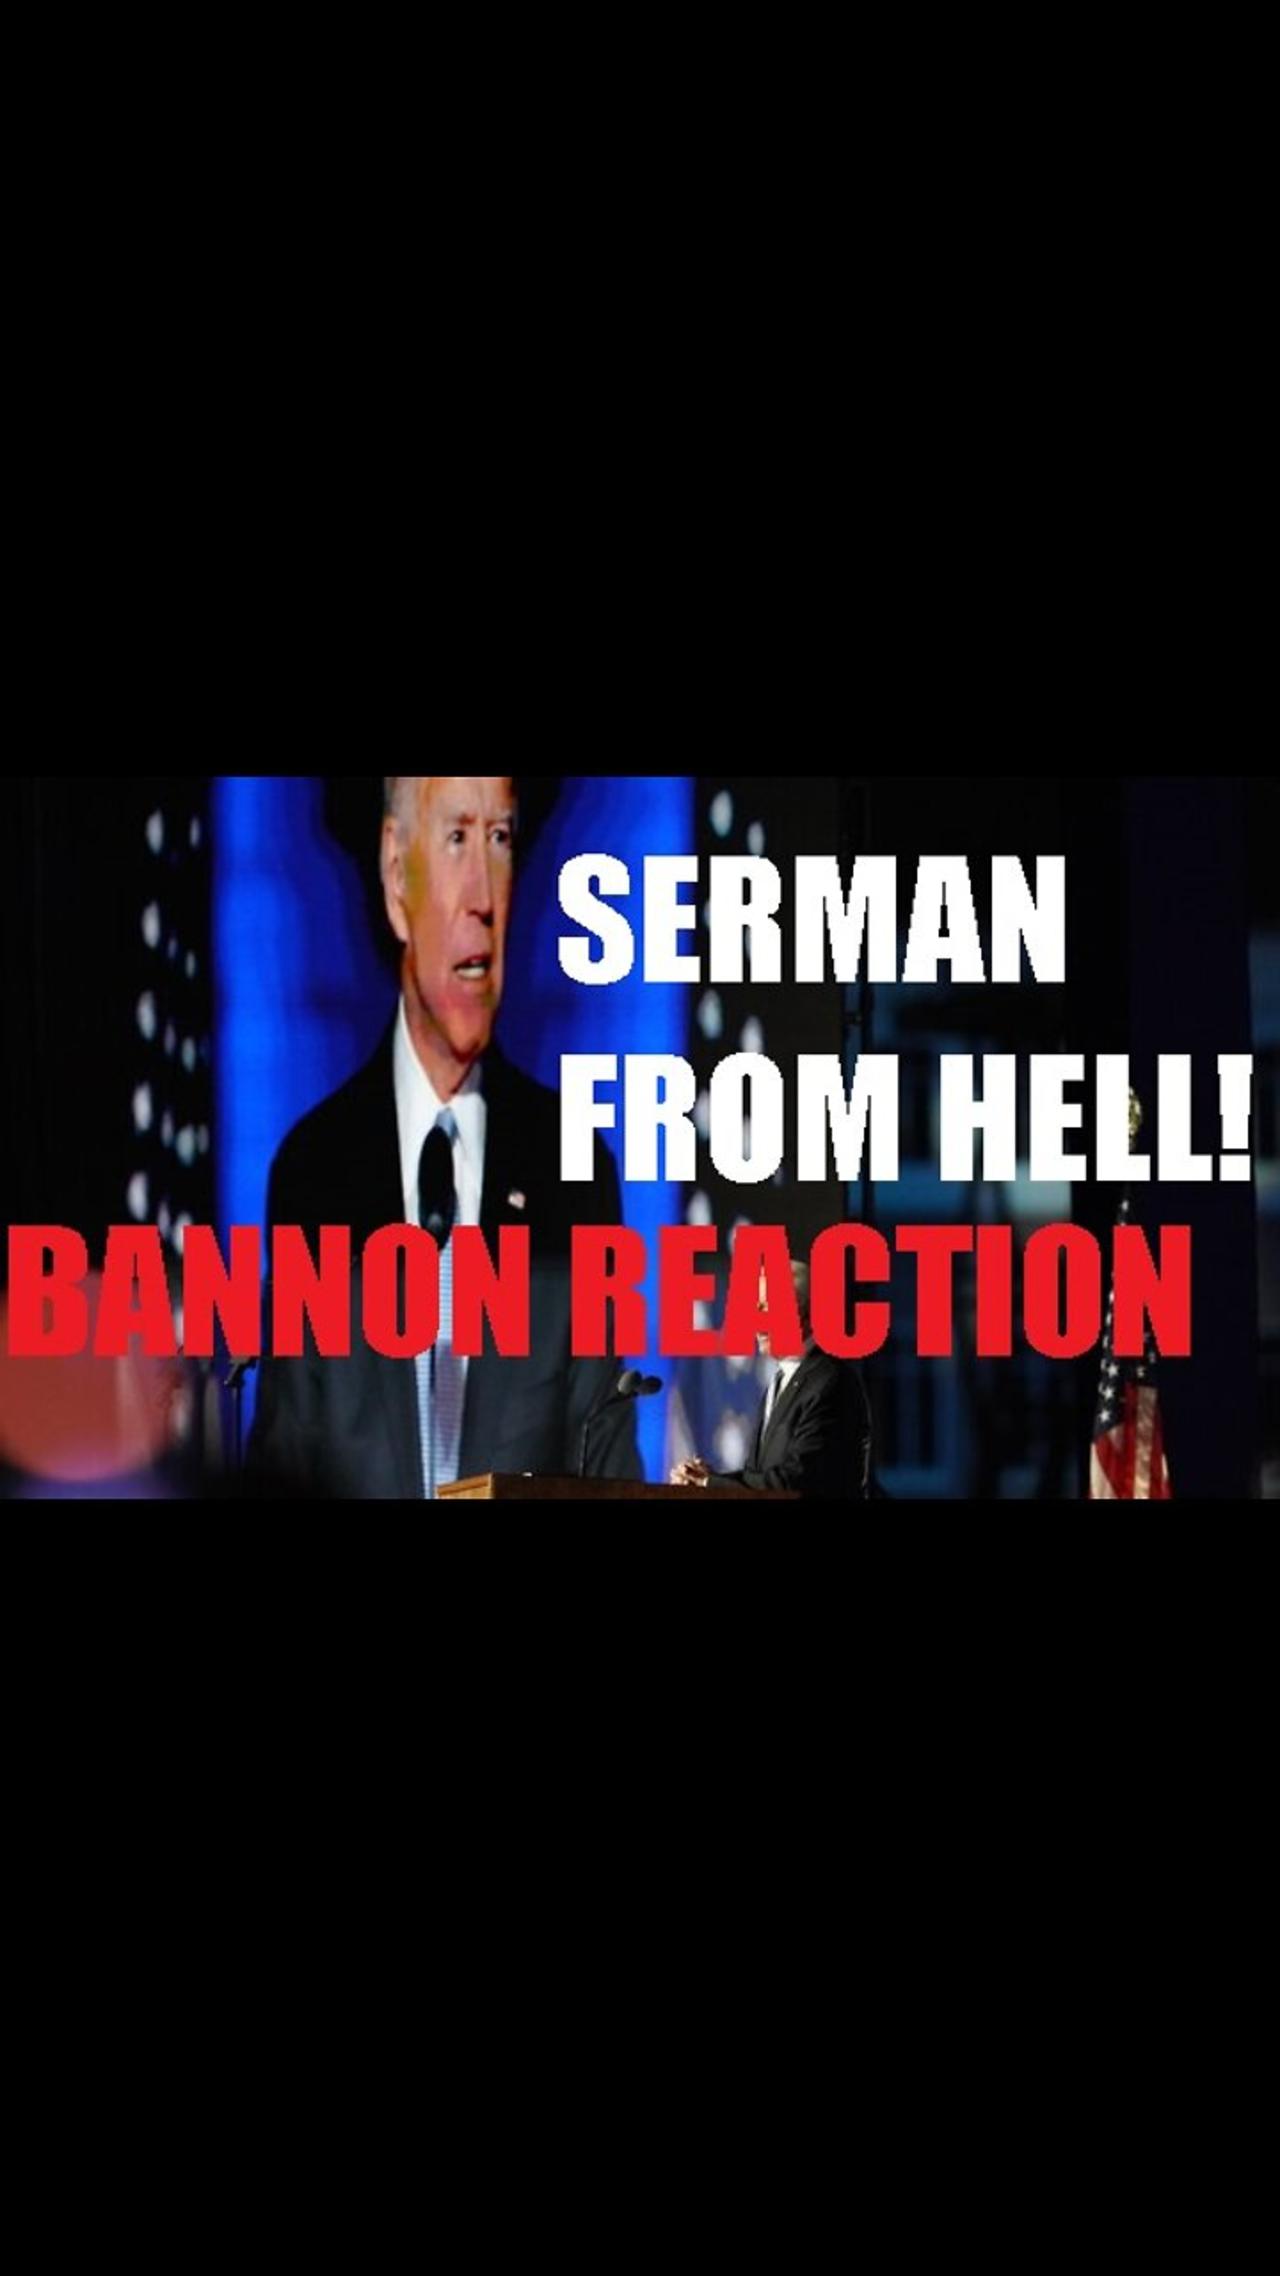 LIVE REACTION TO BANNON GUESTS ON NAZI IMAGERY IN SERMON FROM HELL